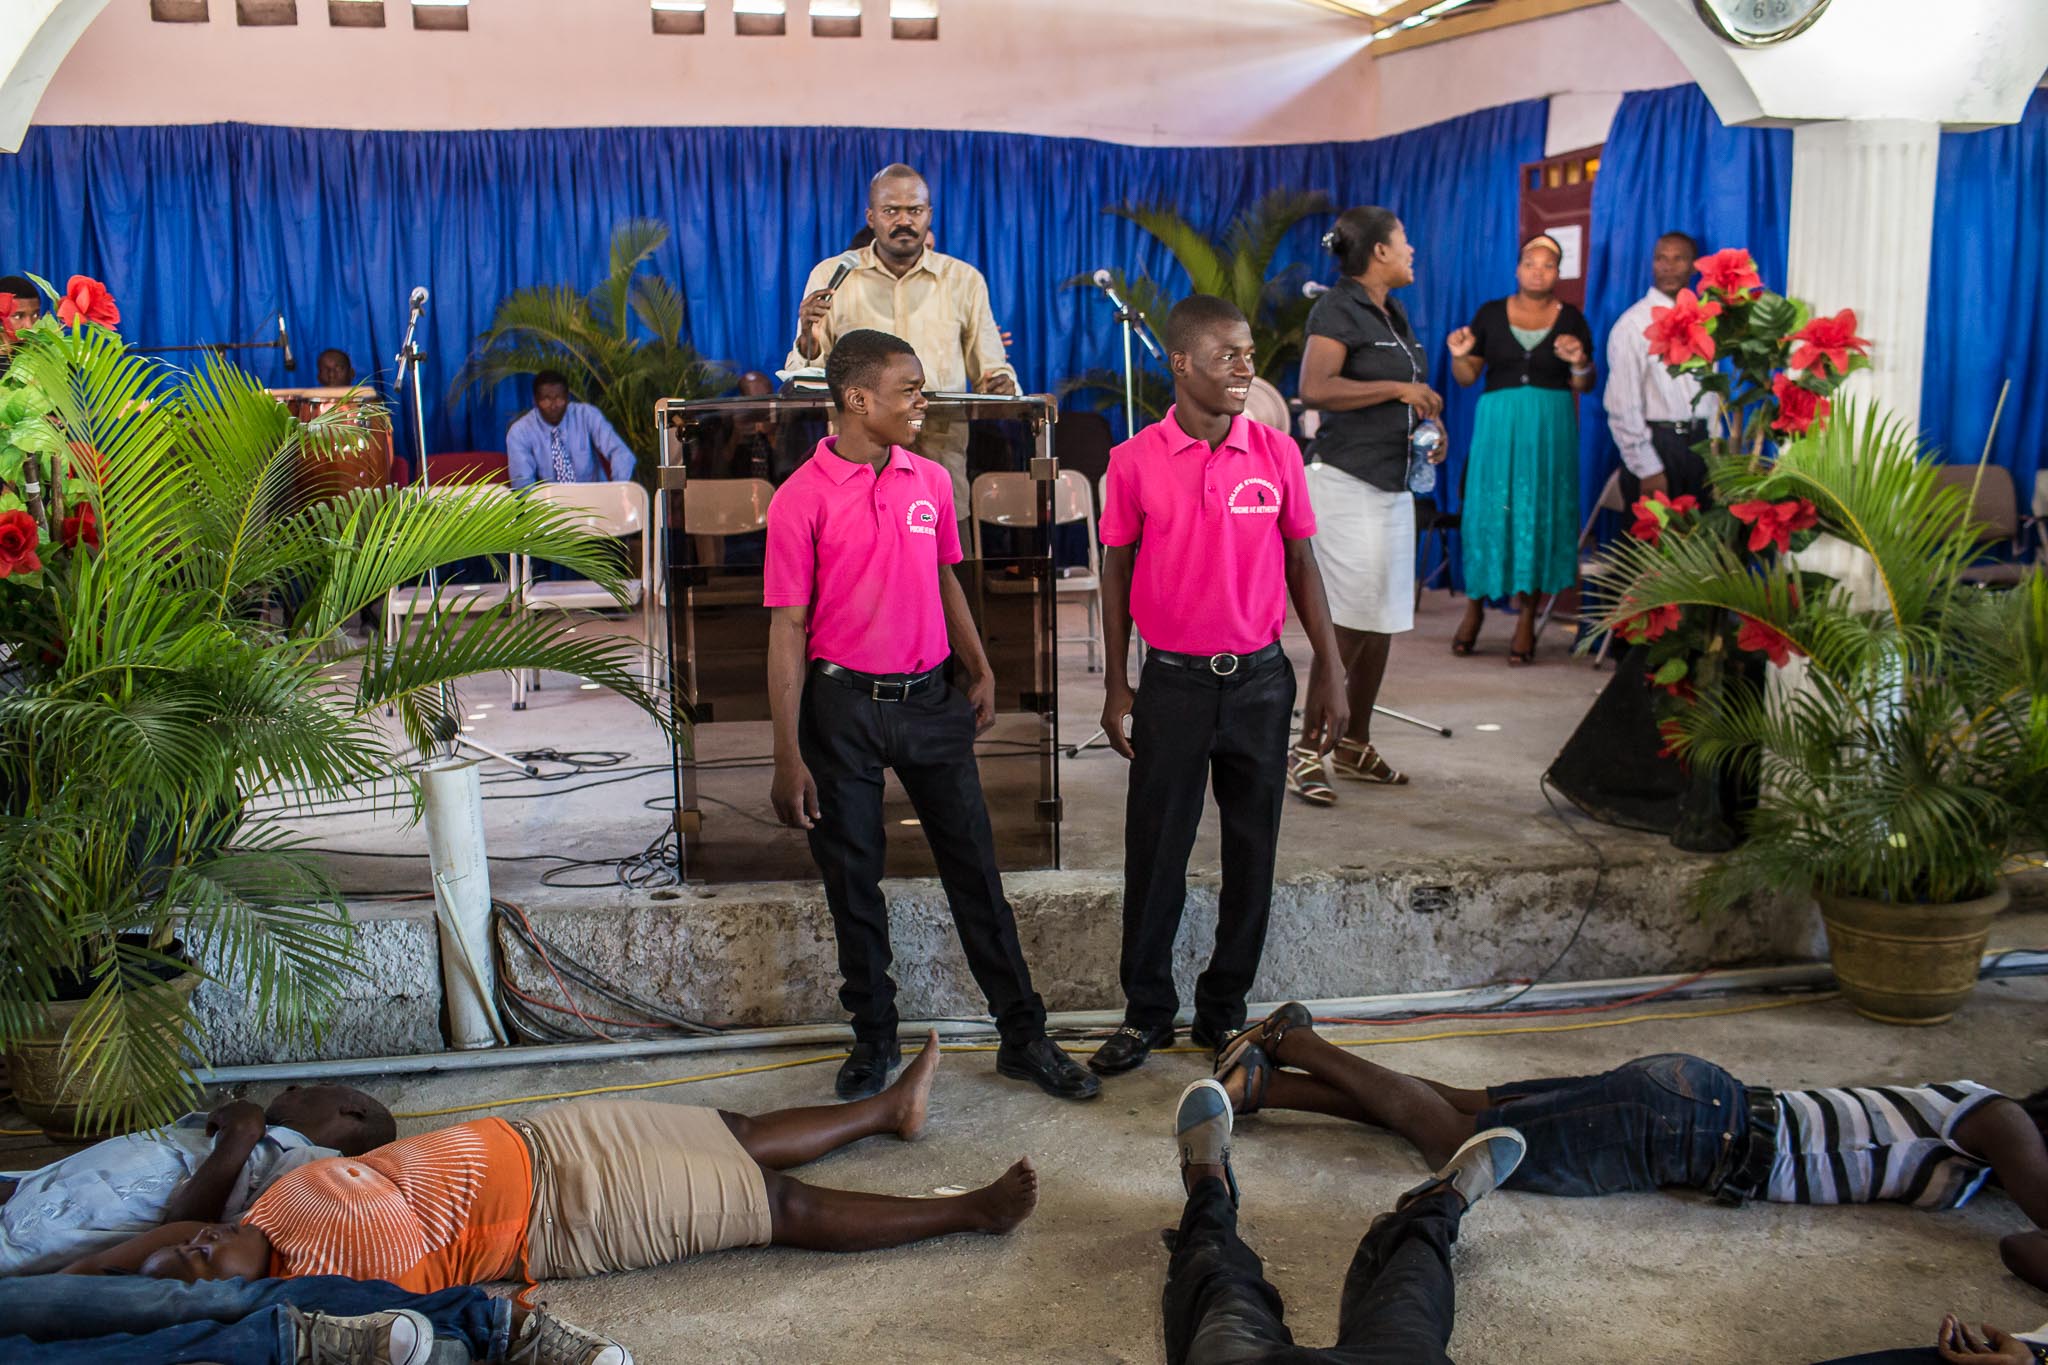  Ushers look over worshipers who have been overcome with religious fervor at L'Eglise Evangelique Piscine de Bethesda, the church of televangelist Marcorel Zidor, on Saturday, December 20, 2014 in Port-au-Prince, Haiti. Pastor Zidor attracts a large 